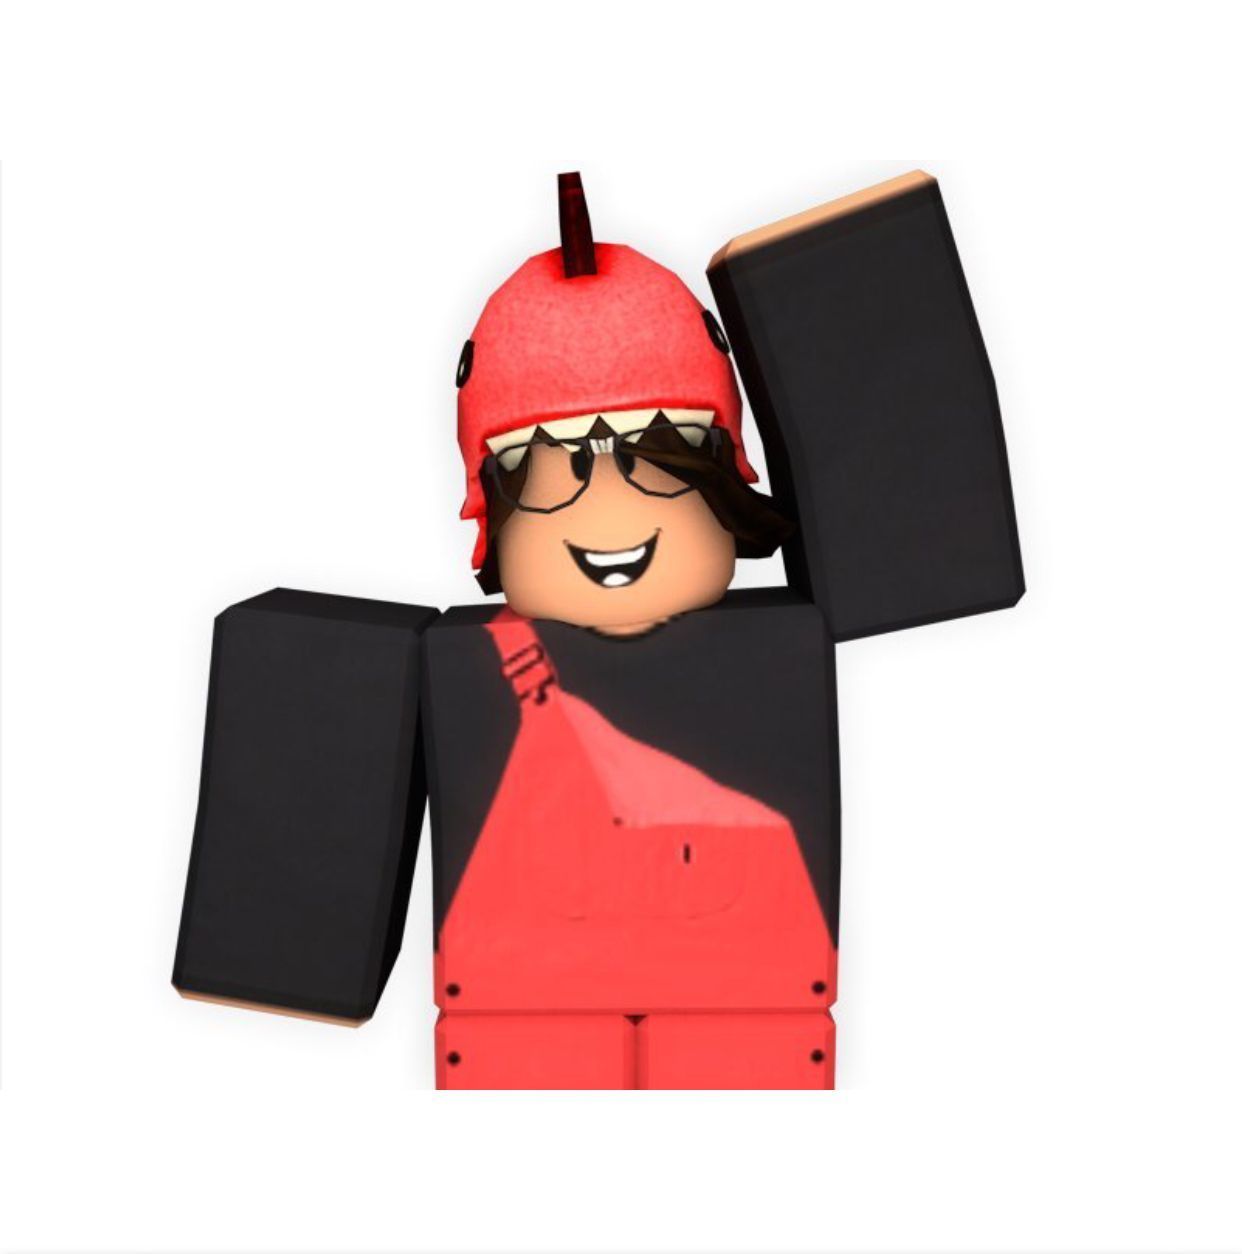 If you are looking for Aesthetic boy roblox wallpaper you've come to the right place. We have colle. Aesthetic boy, Girl cartoon characters, Cute profile picture